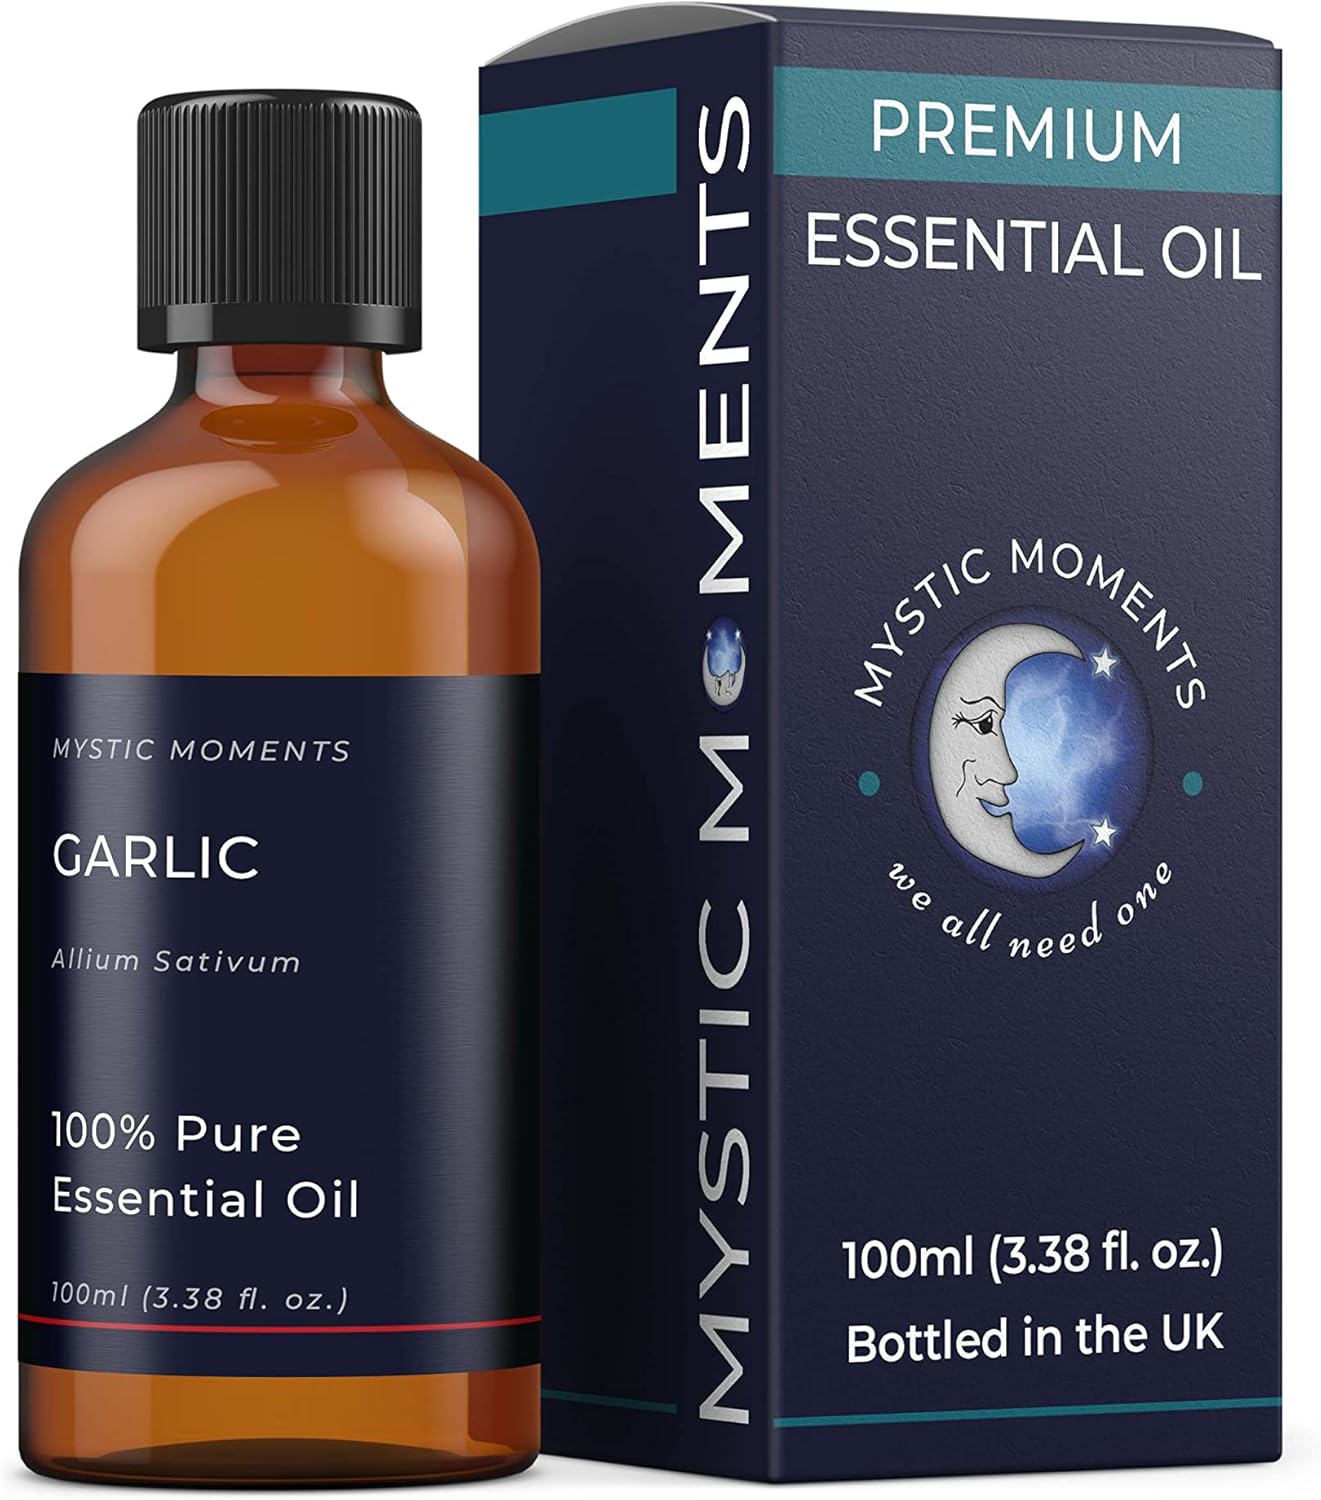 Mystic Moments | Garlic Essential Oil 100ml - Pure & Natural oil for Diffusers, Aromatherapy & Massage Blends Vegan GMO Free